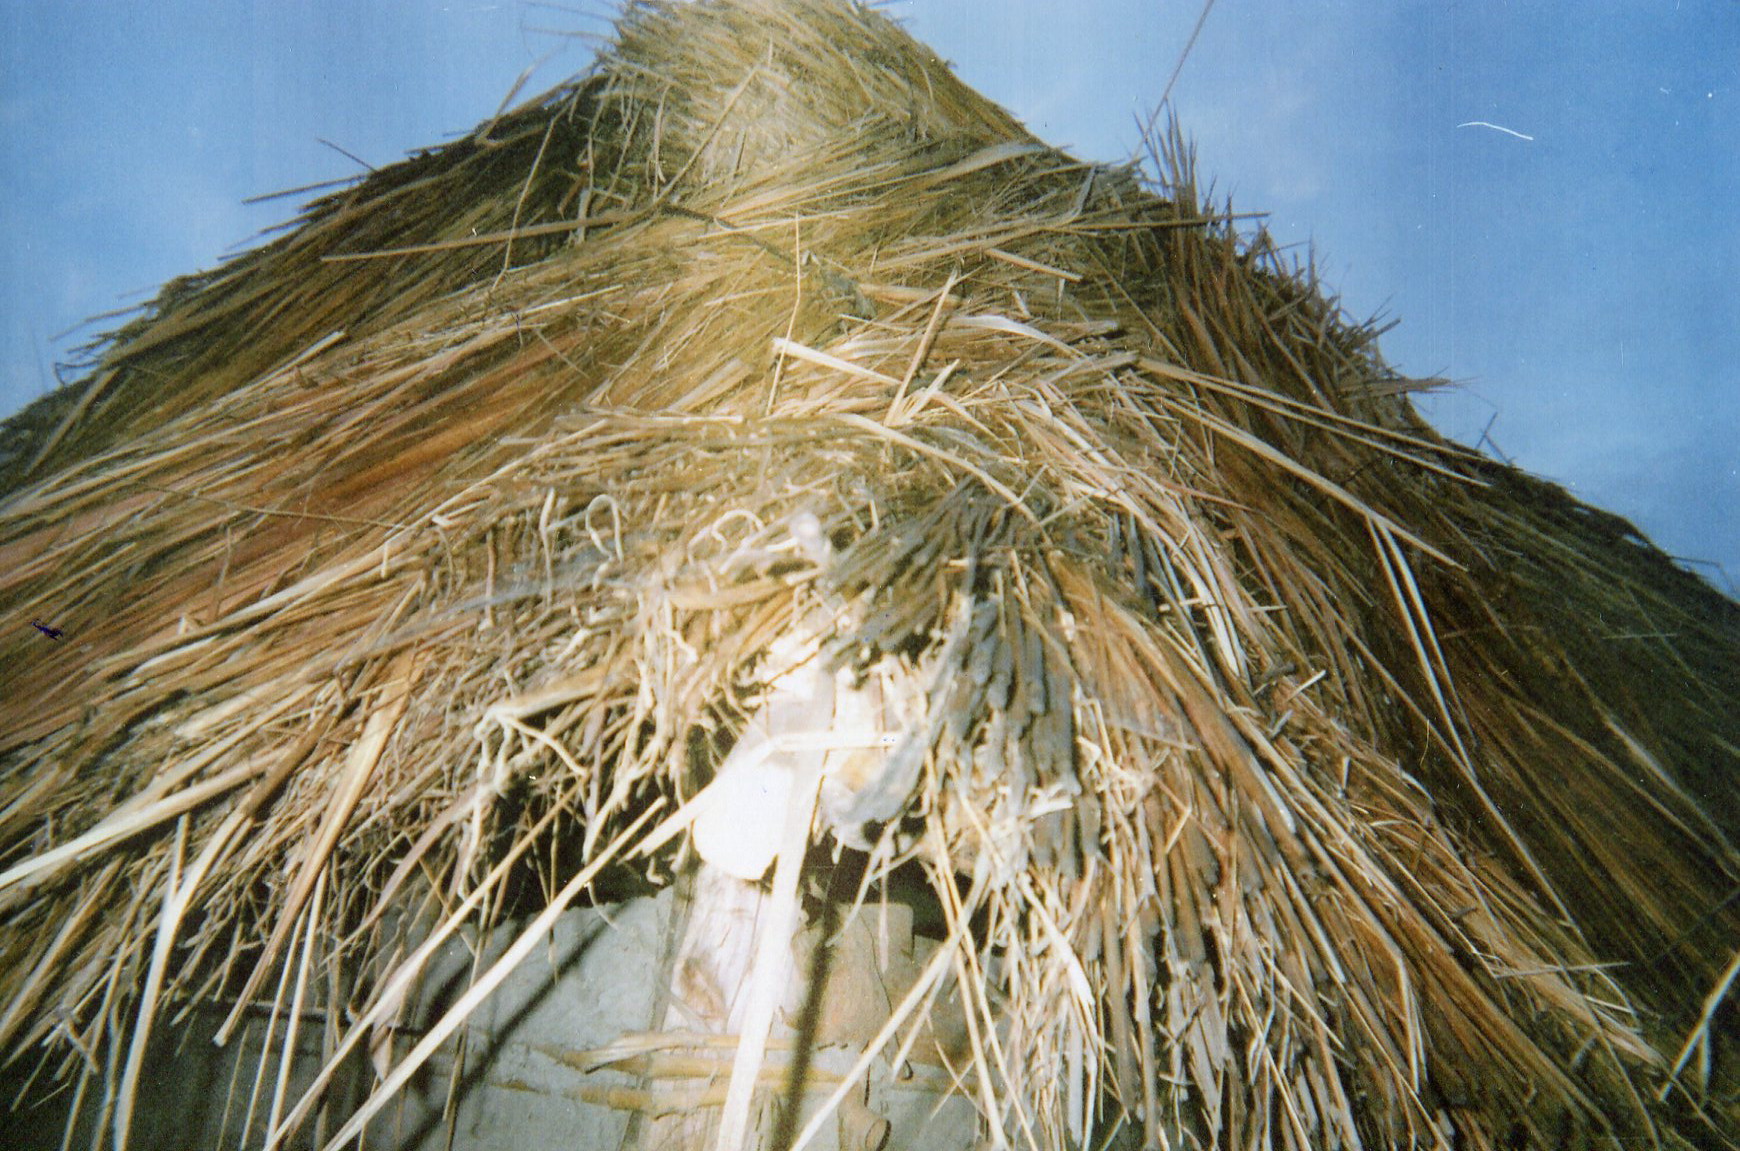  This straw hut reminds me of how we lived with our families under this roof before the war.&nbsp; 